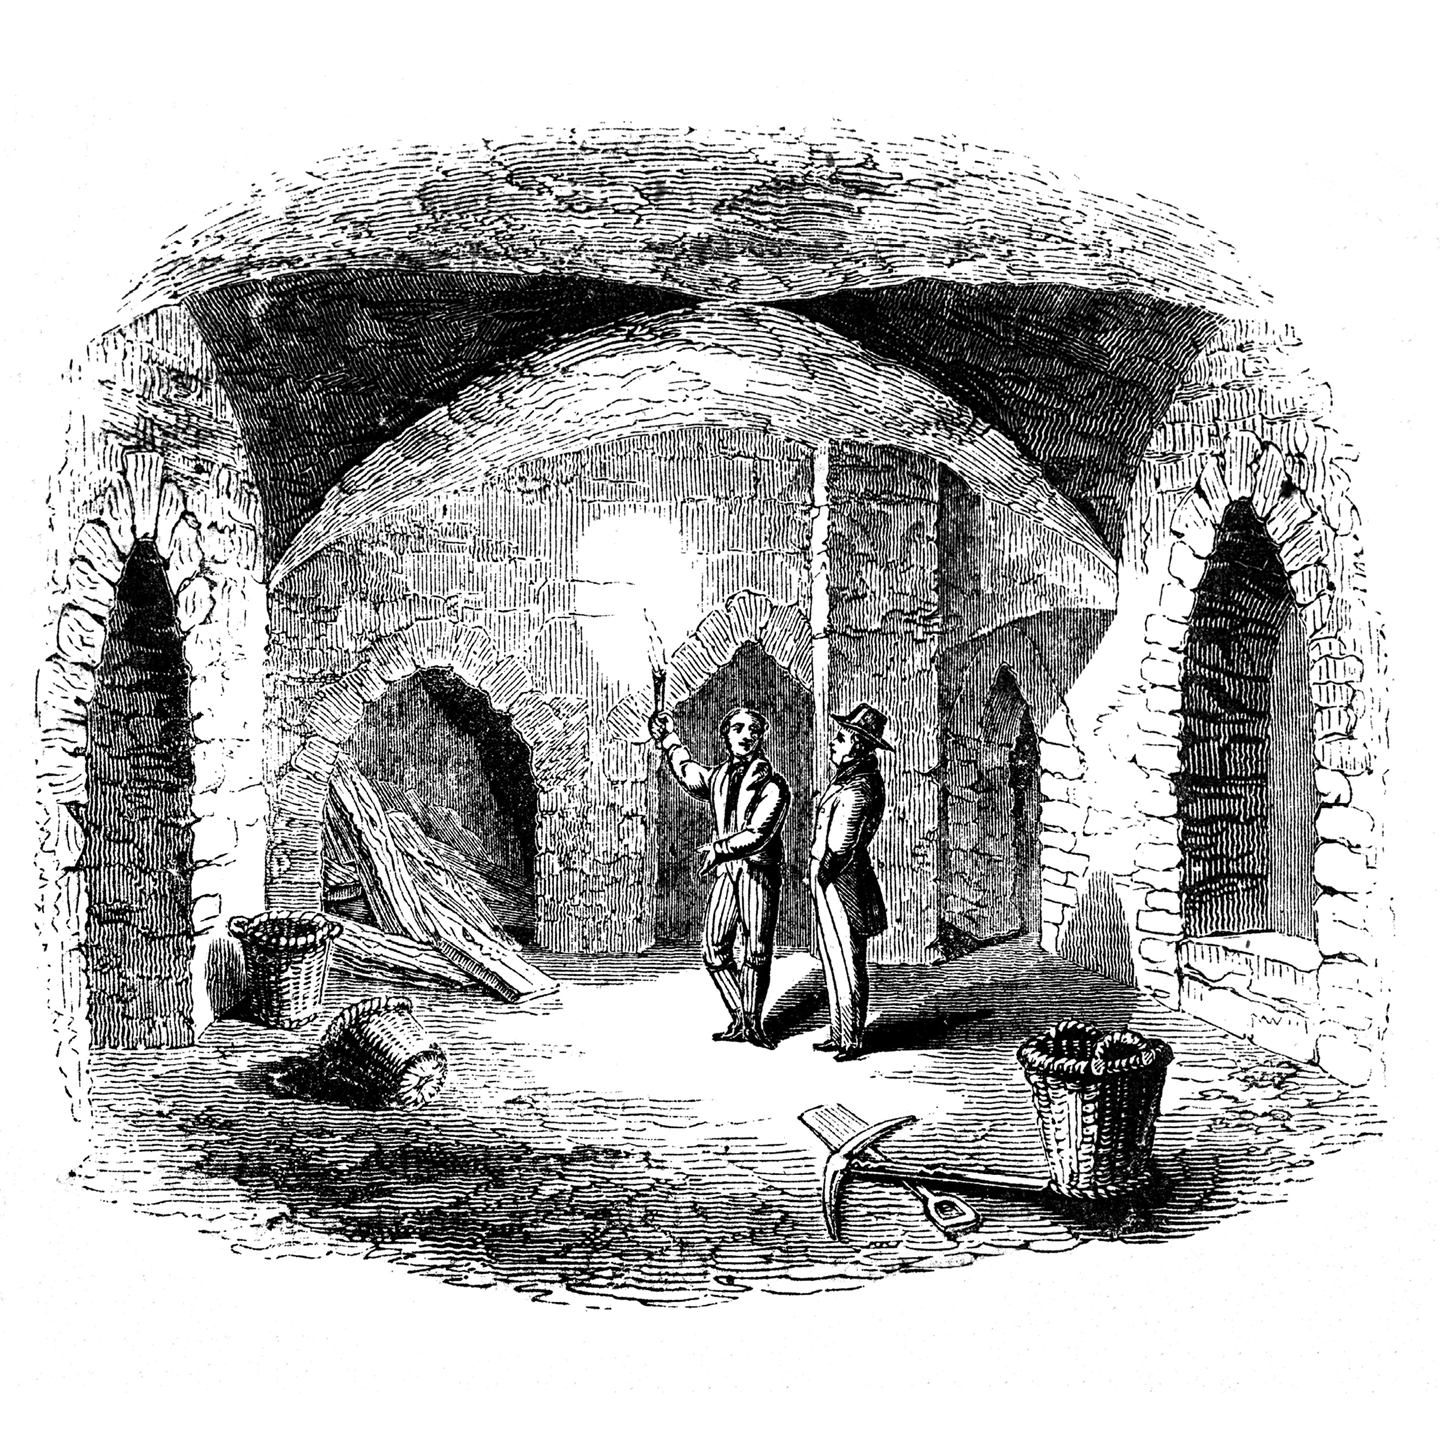 Image: An illustration of the storeroom where the gunpowder was hidden under the Houses of Parliament